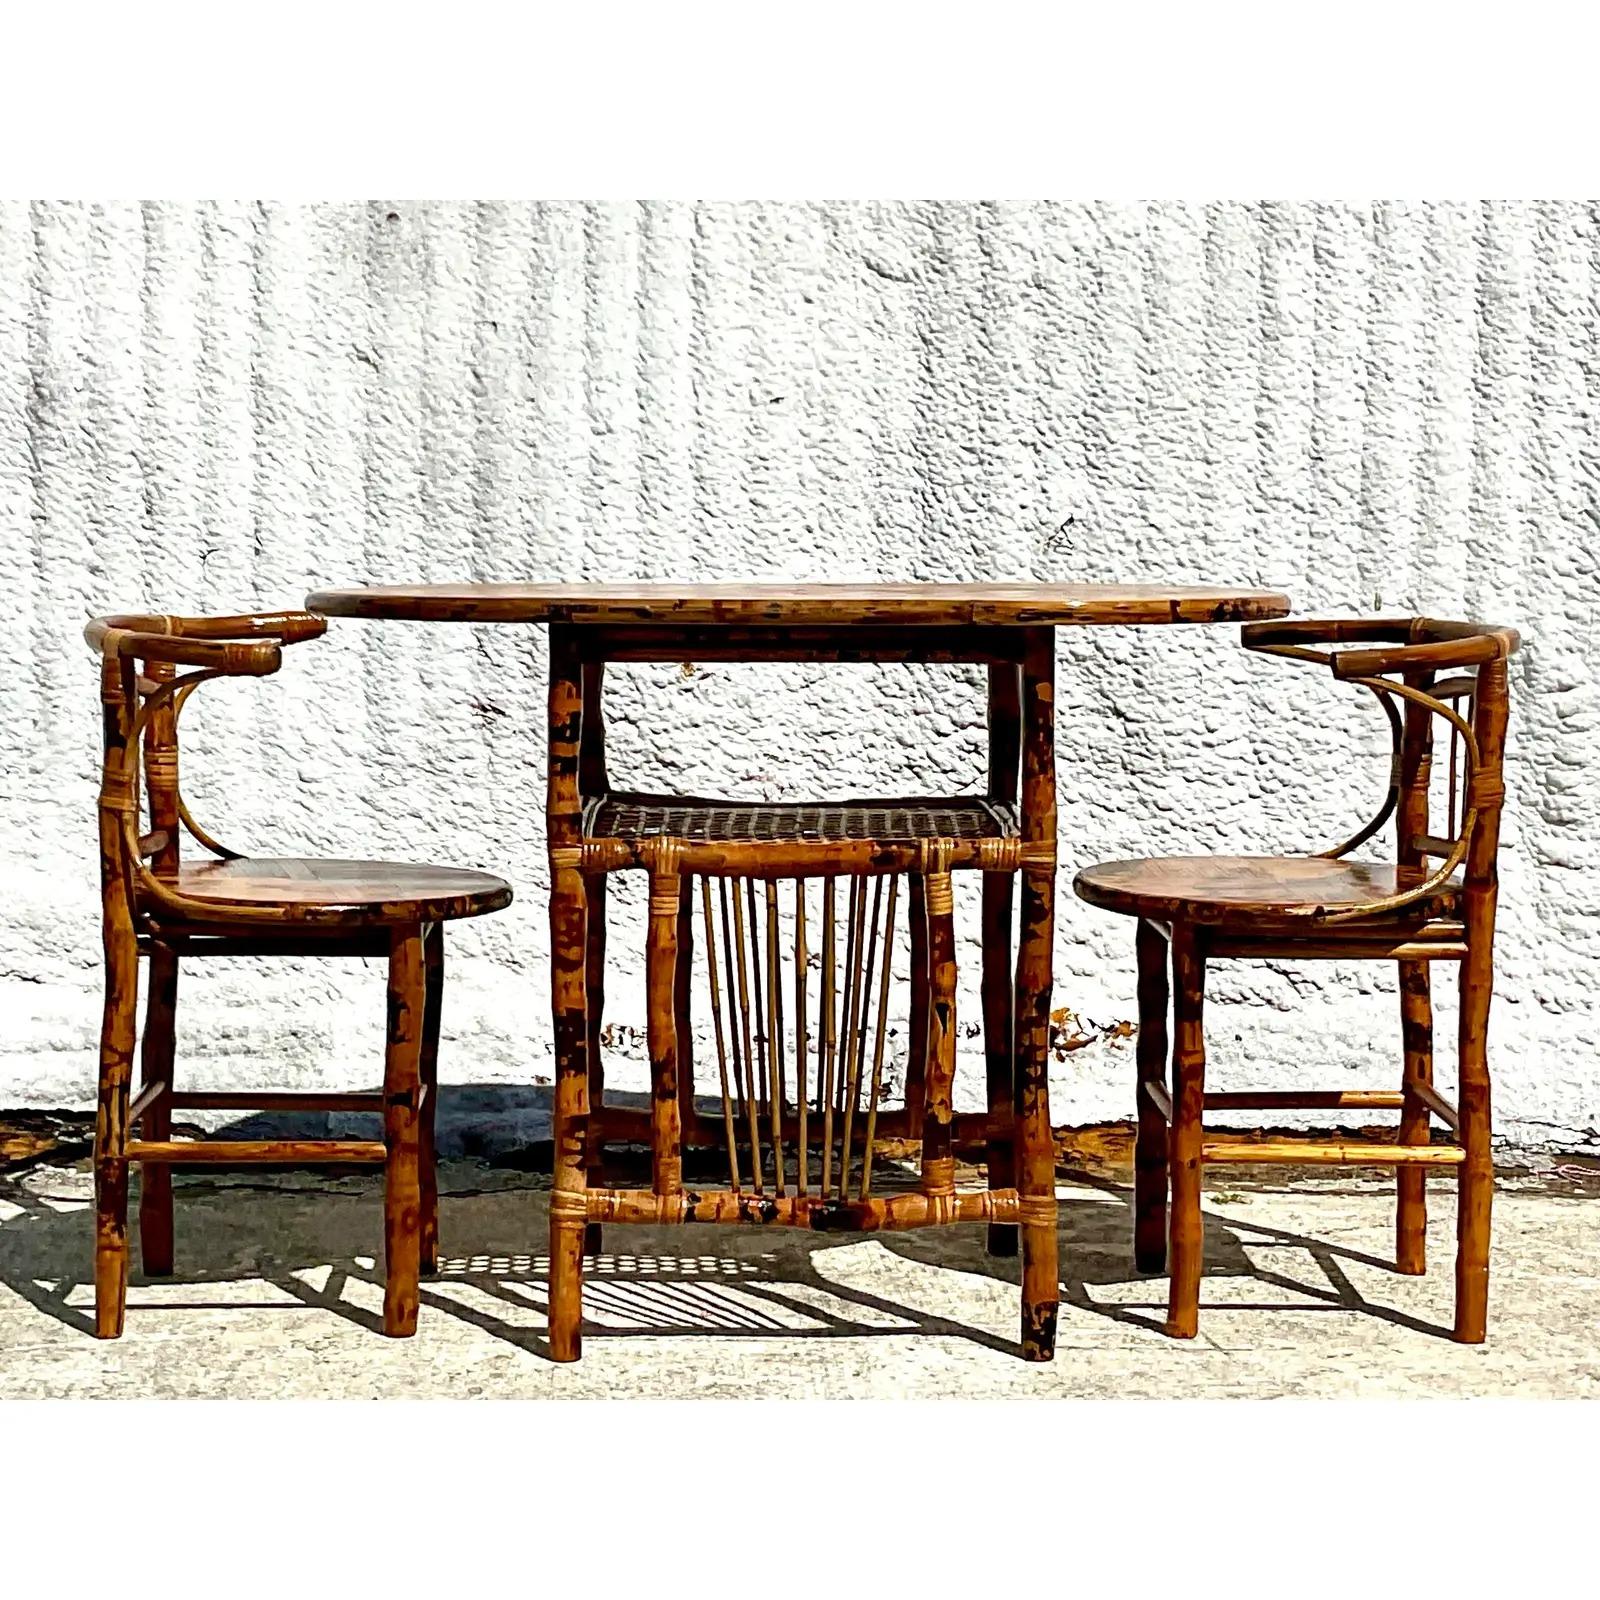 Fabulous vintage Coastal Honeymoon set. Beautiful tortoise shell rattan in a high gloss finish. Two little seats with an oval table. Acquired from a Palm Beach estate.